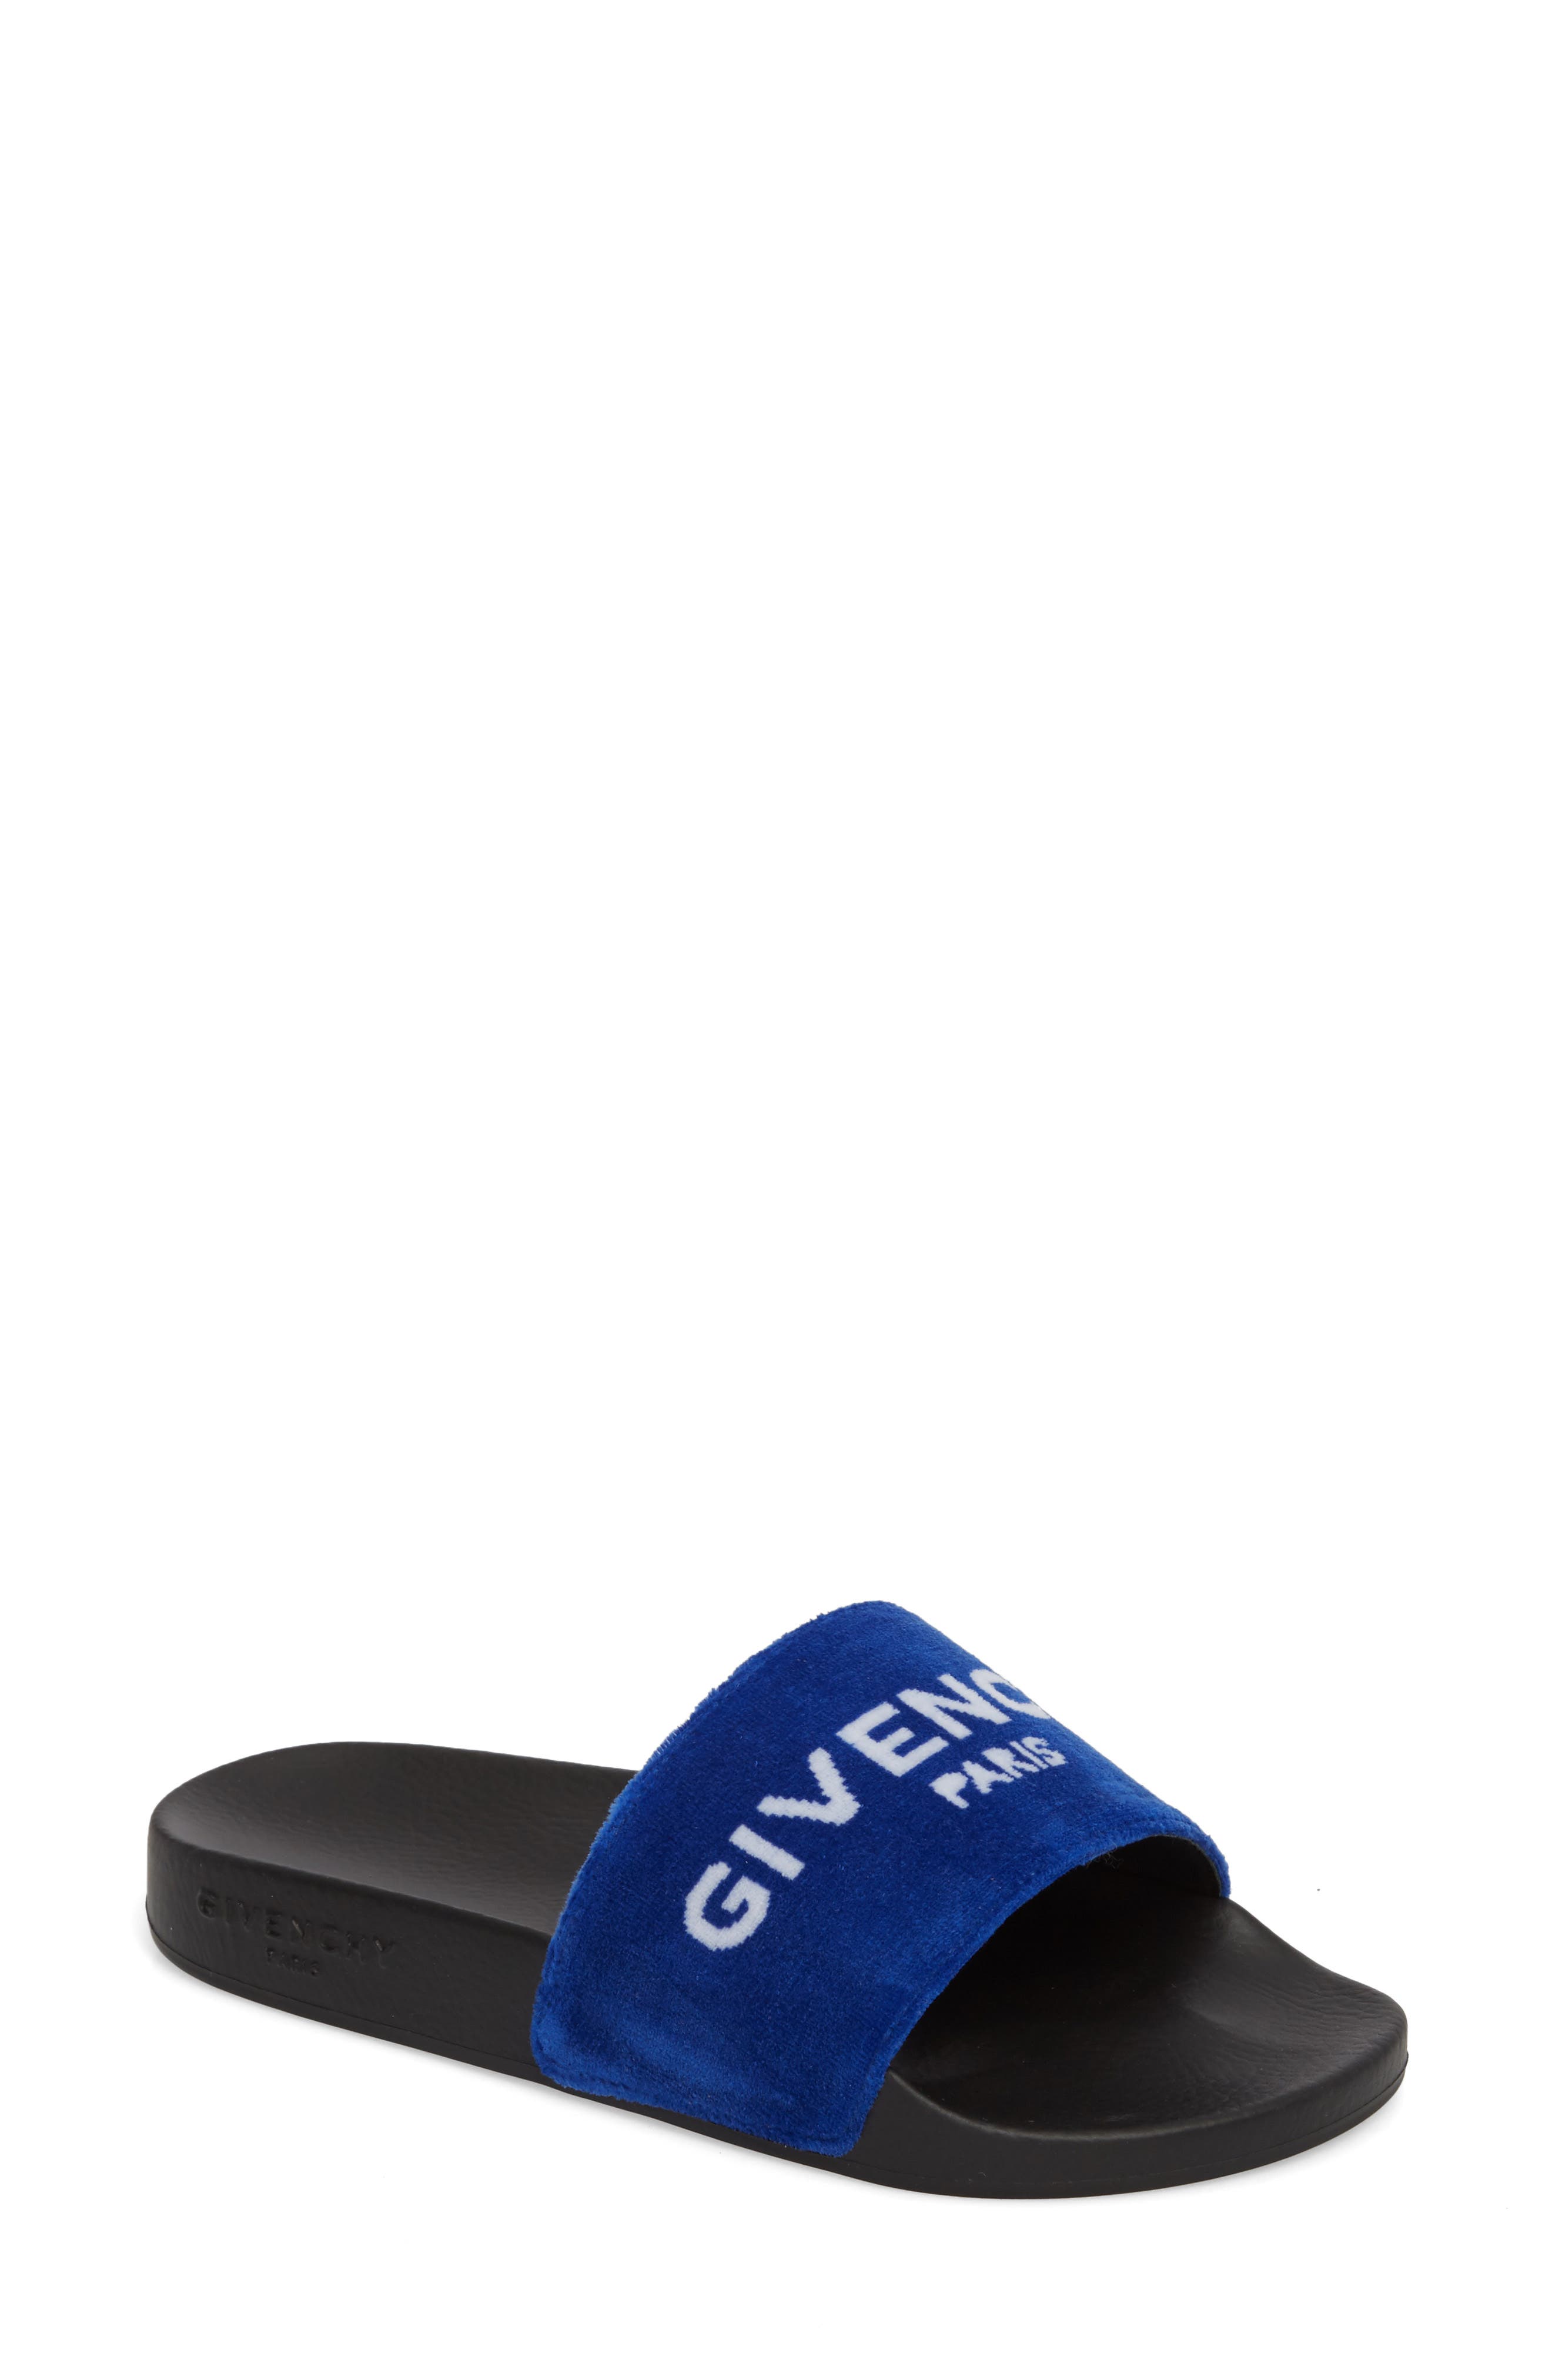 givenchy sliders blue